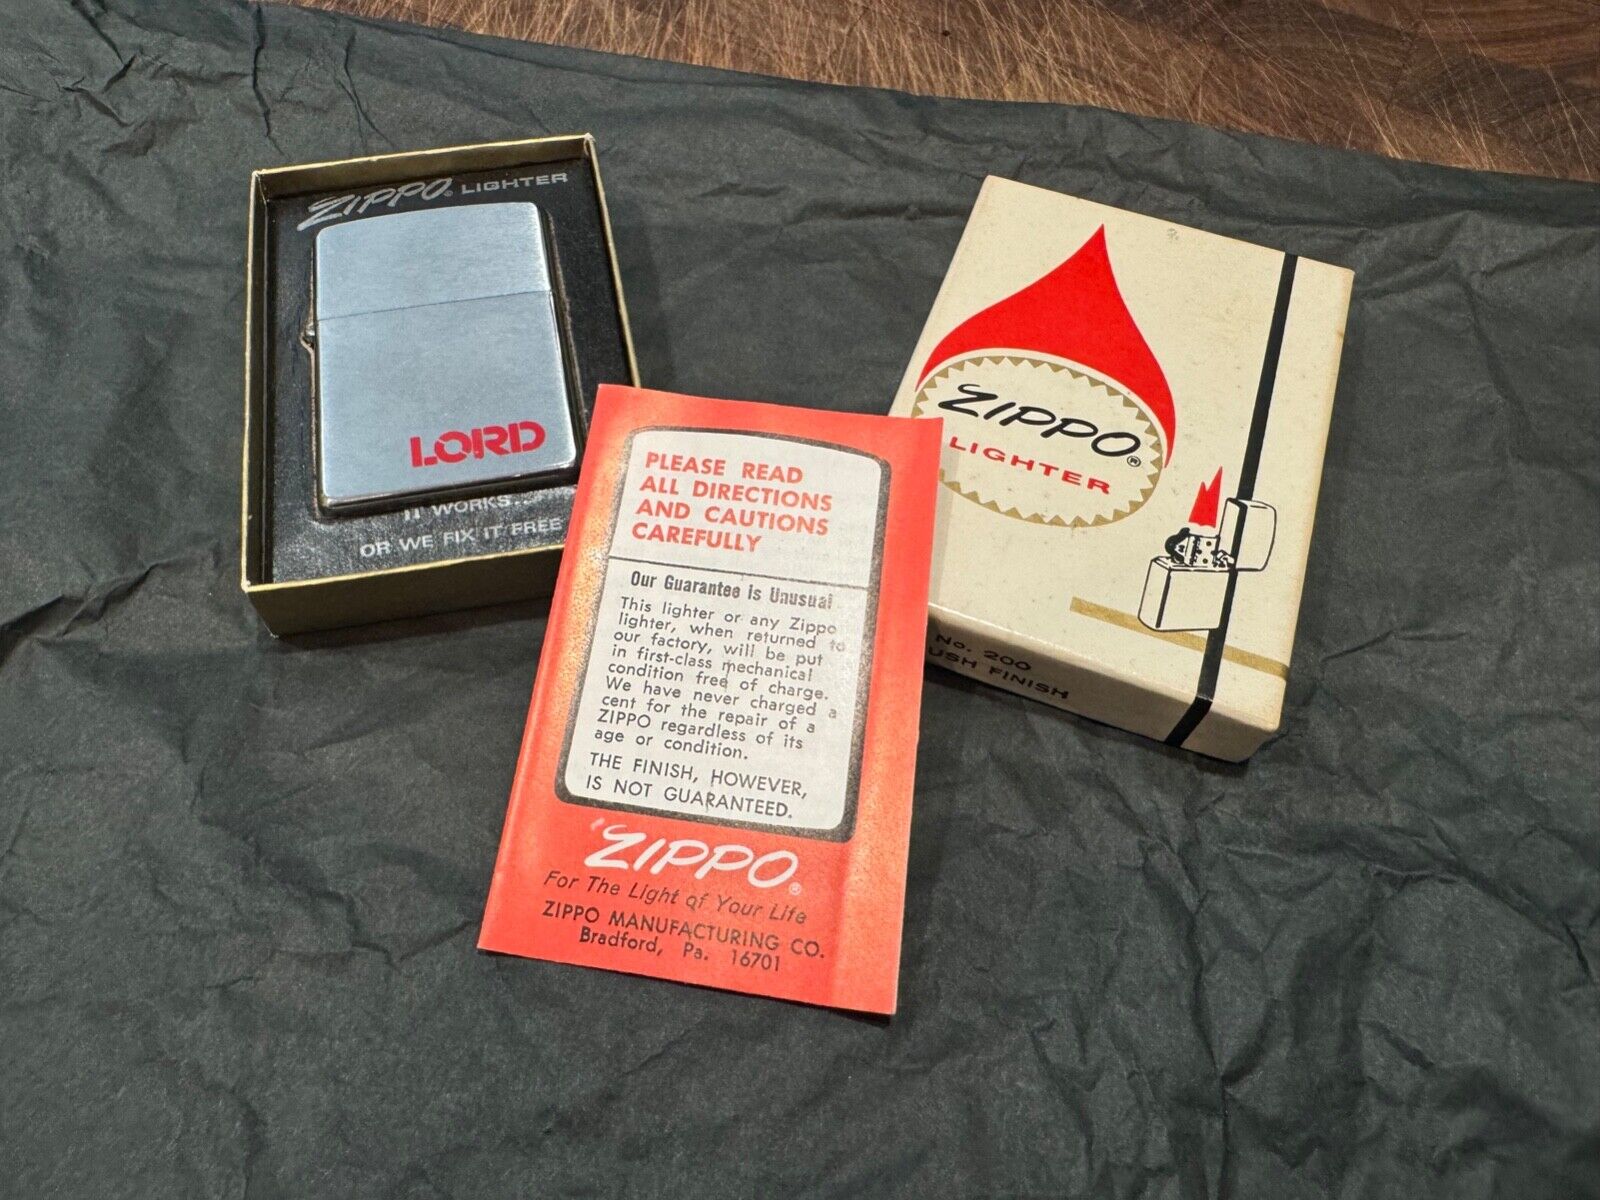 ORIGINAL VINTAGE 1970s 1974 ZIPPO LIGHTER UNFIRED IN BOX LORD Corp. Cary, NC